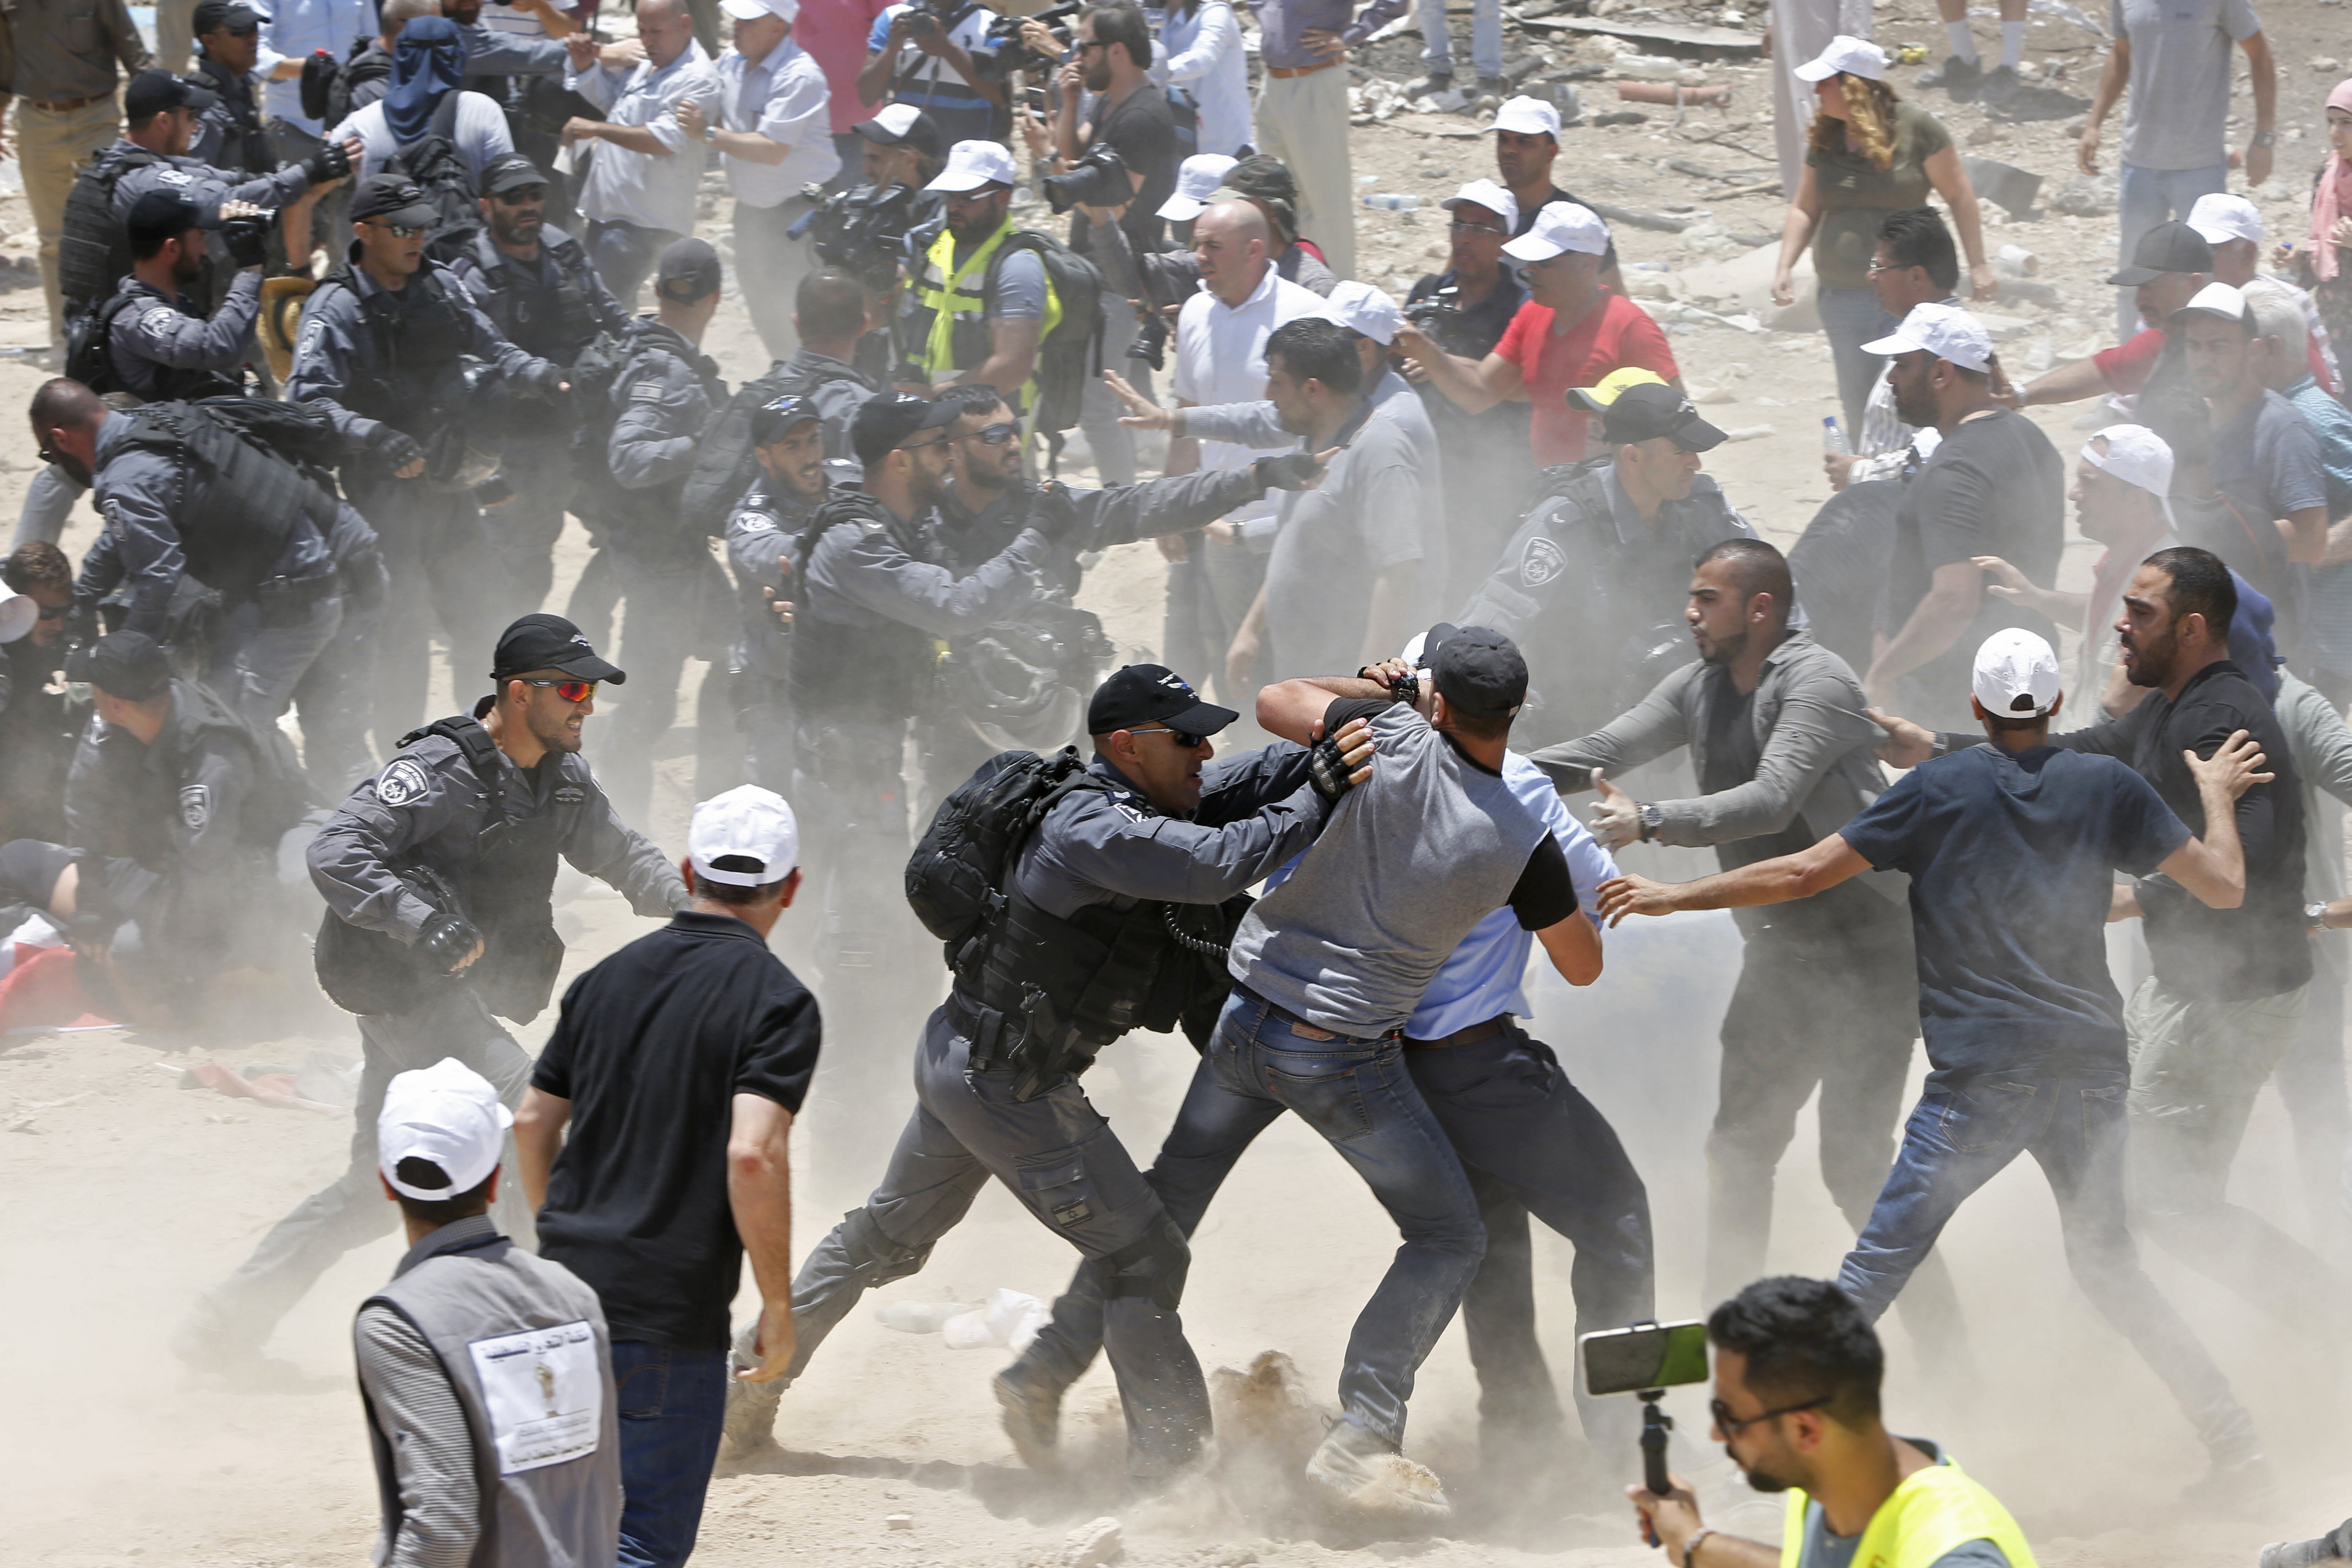 Palestinians protesting the planned demolition of the West Bank hamlet of Khan al-Ahmar scuffle with Israeli police officers, Wednesday, July 4, 2018. Israel says the structures were illegally built and pose a threat to residents because of their proximity to a highway. Critics say it is nearly impossible to get building permits, and that the residents are being removed to clear the way for Jewish settlements. (AP Photo/Majdi Mohammed)